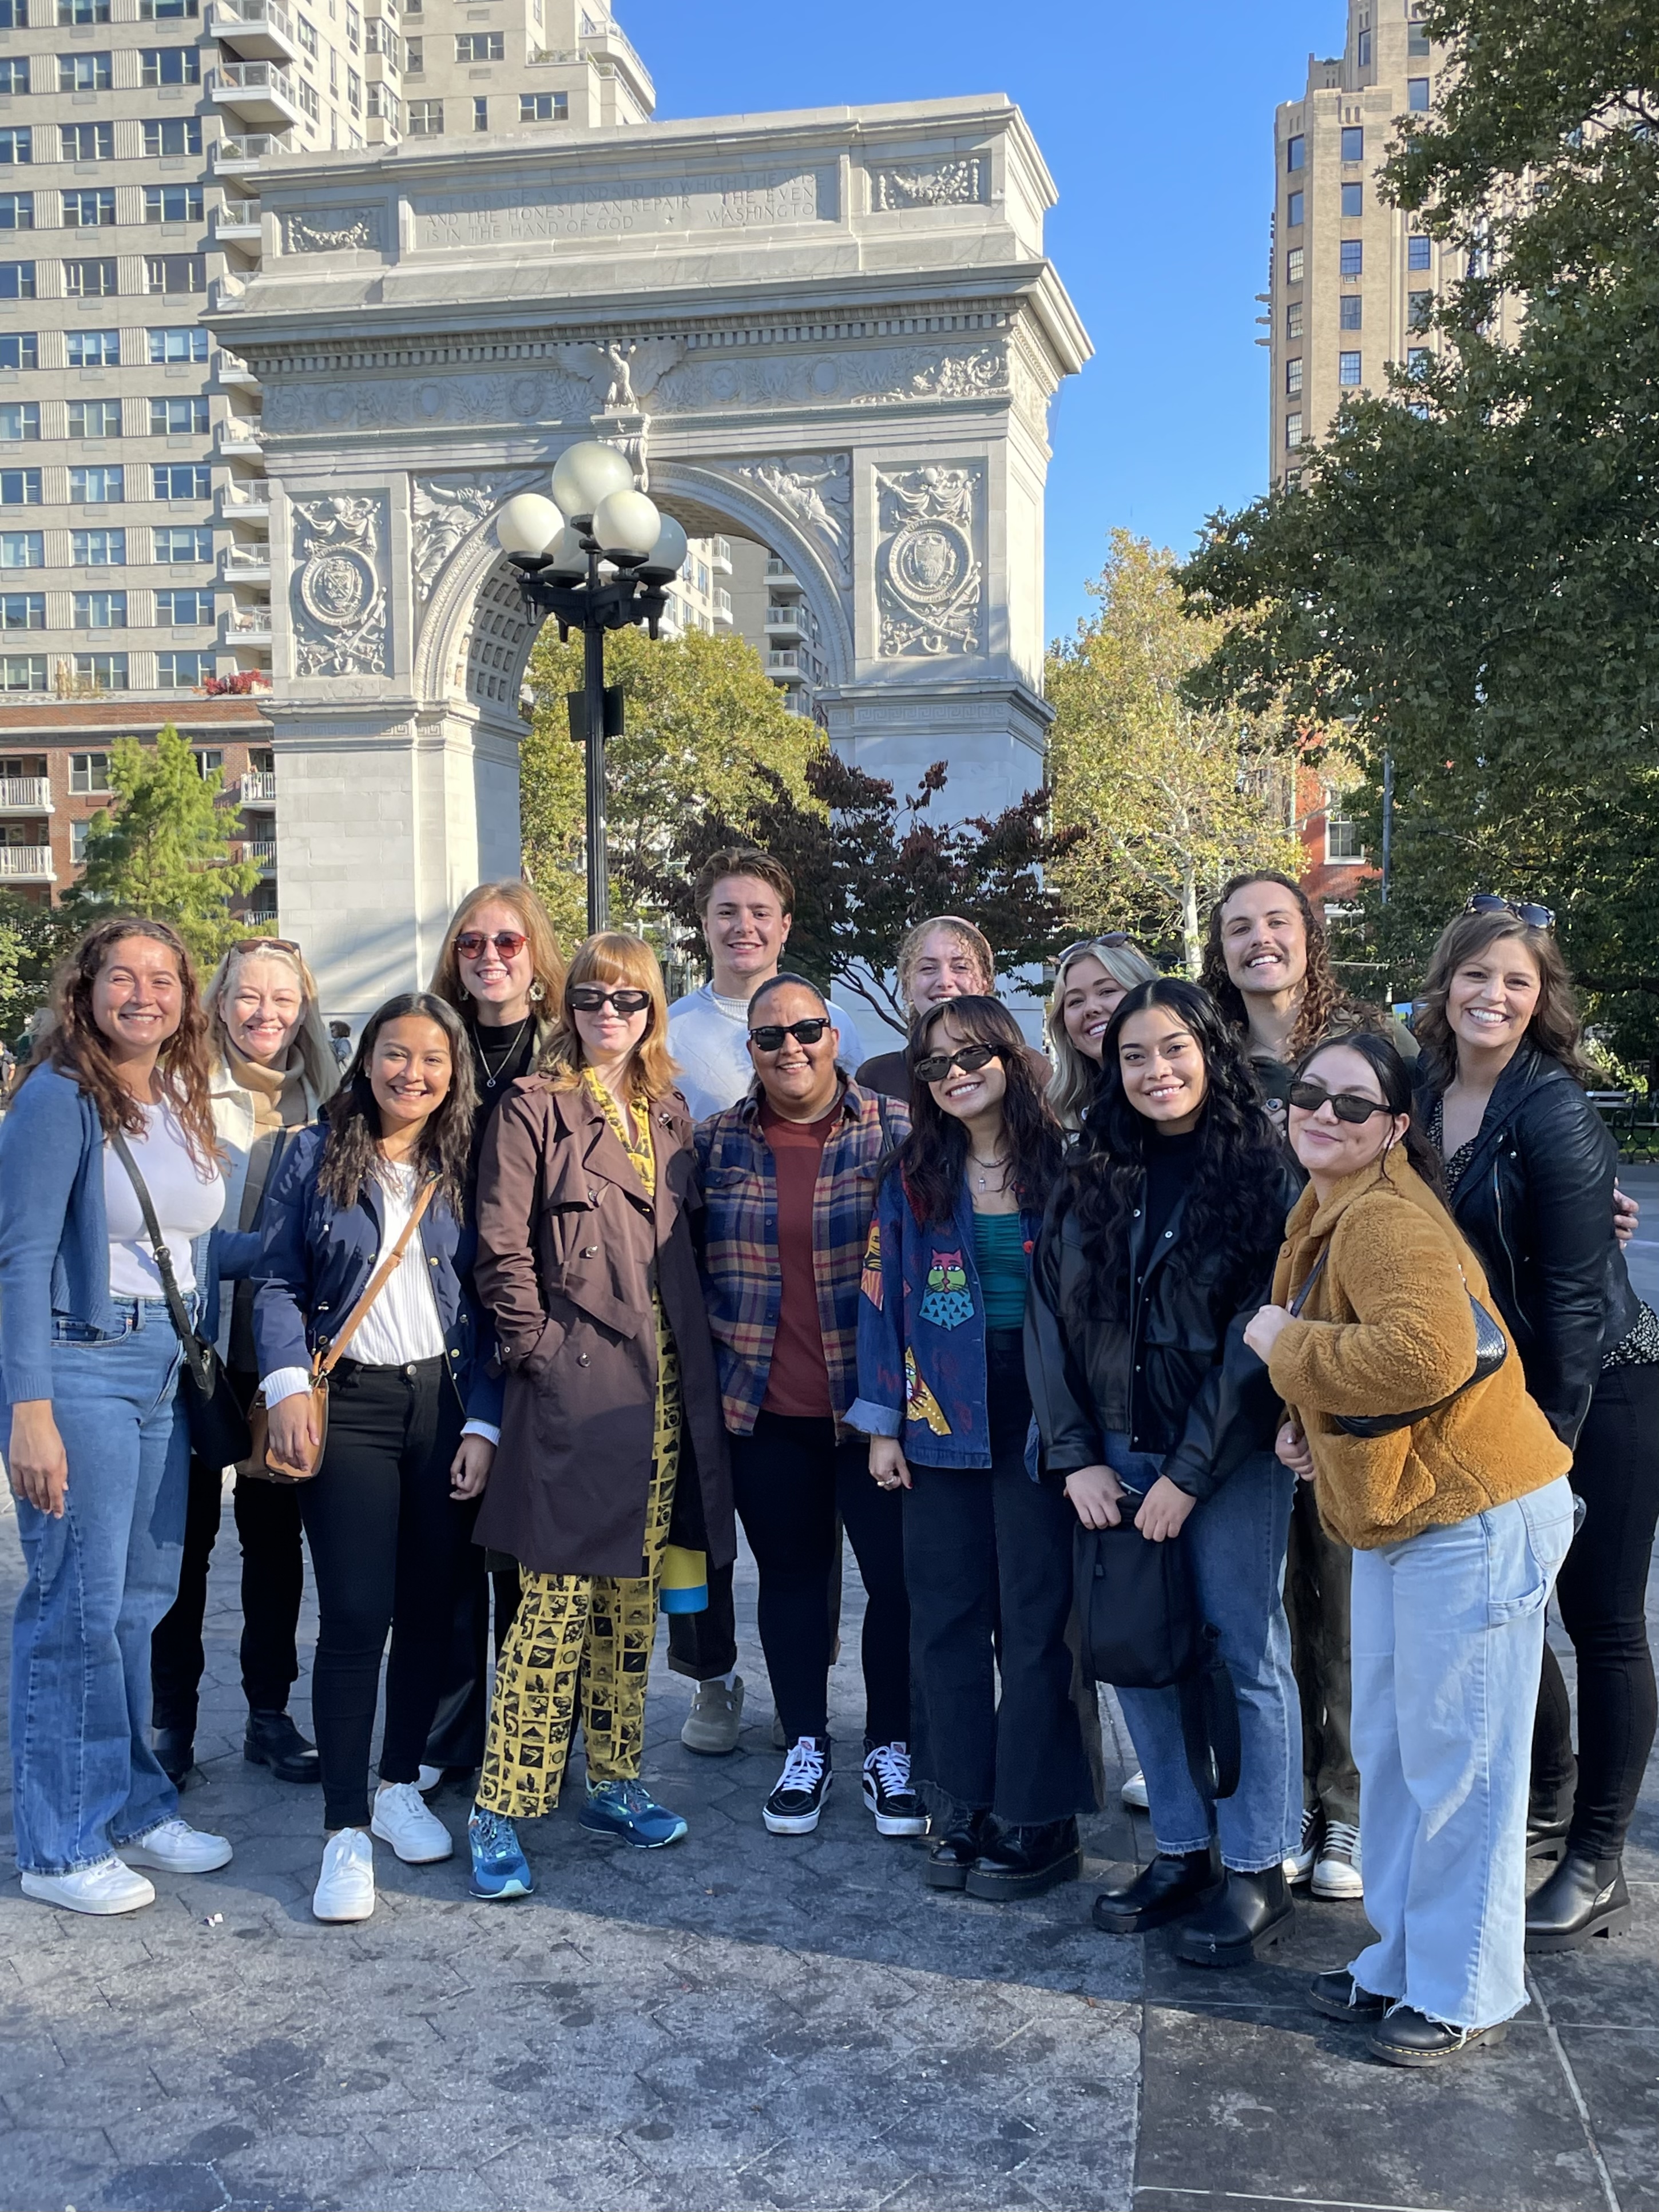 In October 2022, PLNU political science faculty members Amy Nantkes and Linda Beail took 12 students to New York to study the people and material culture of political and social movements.